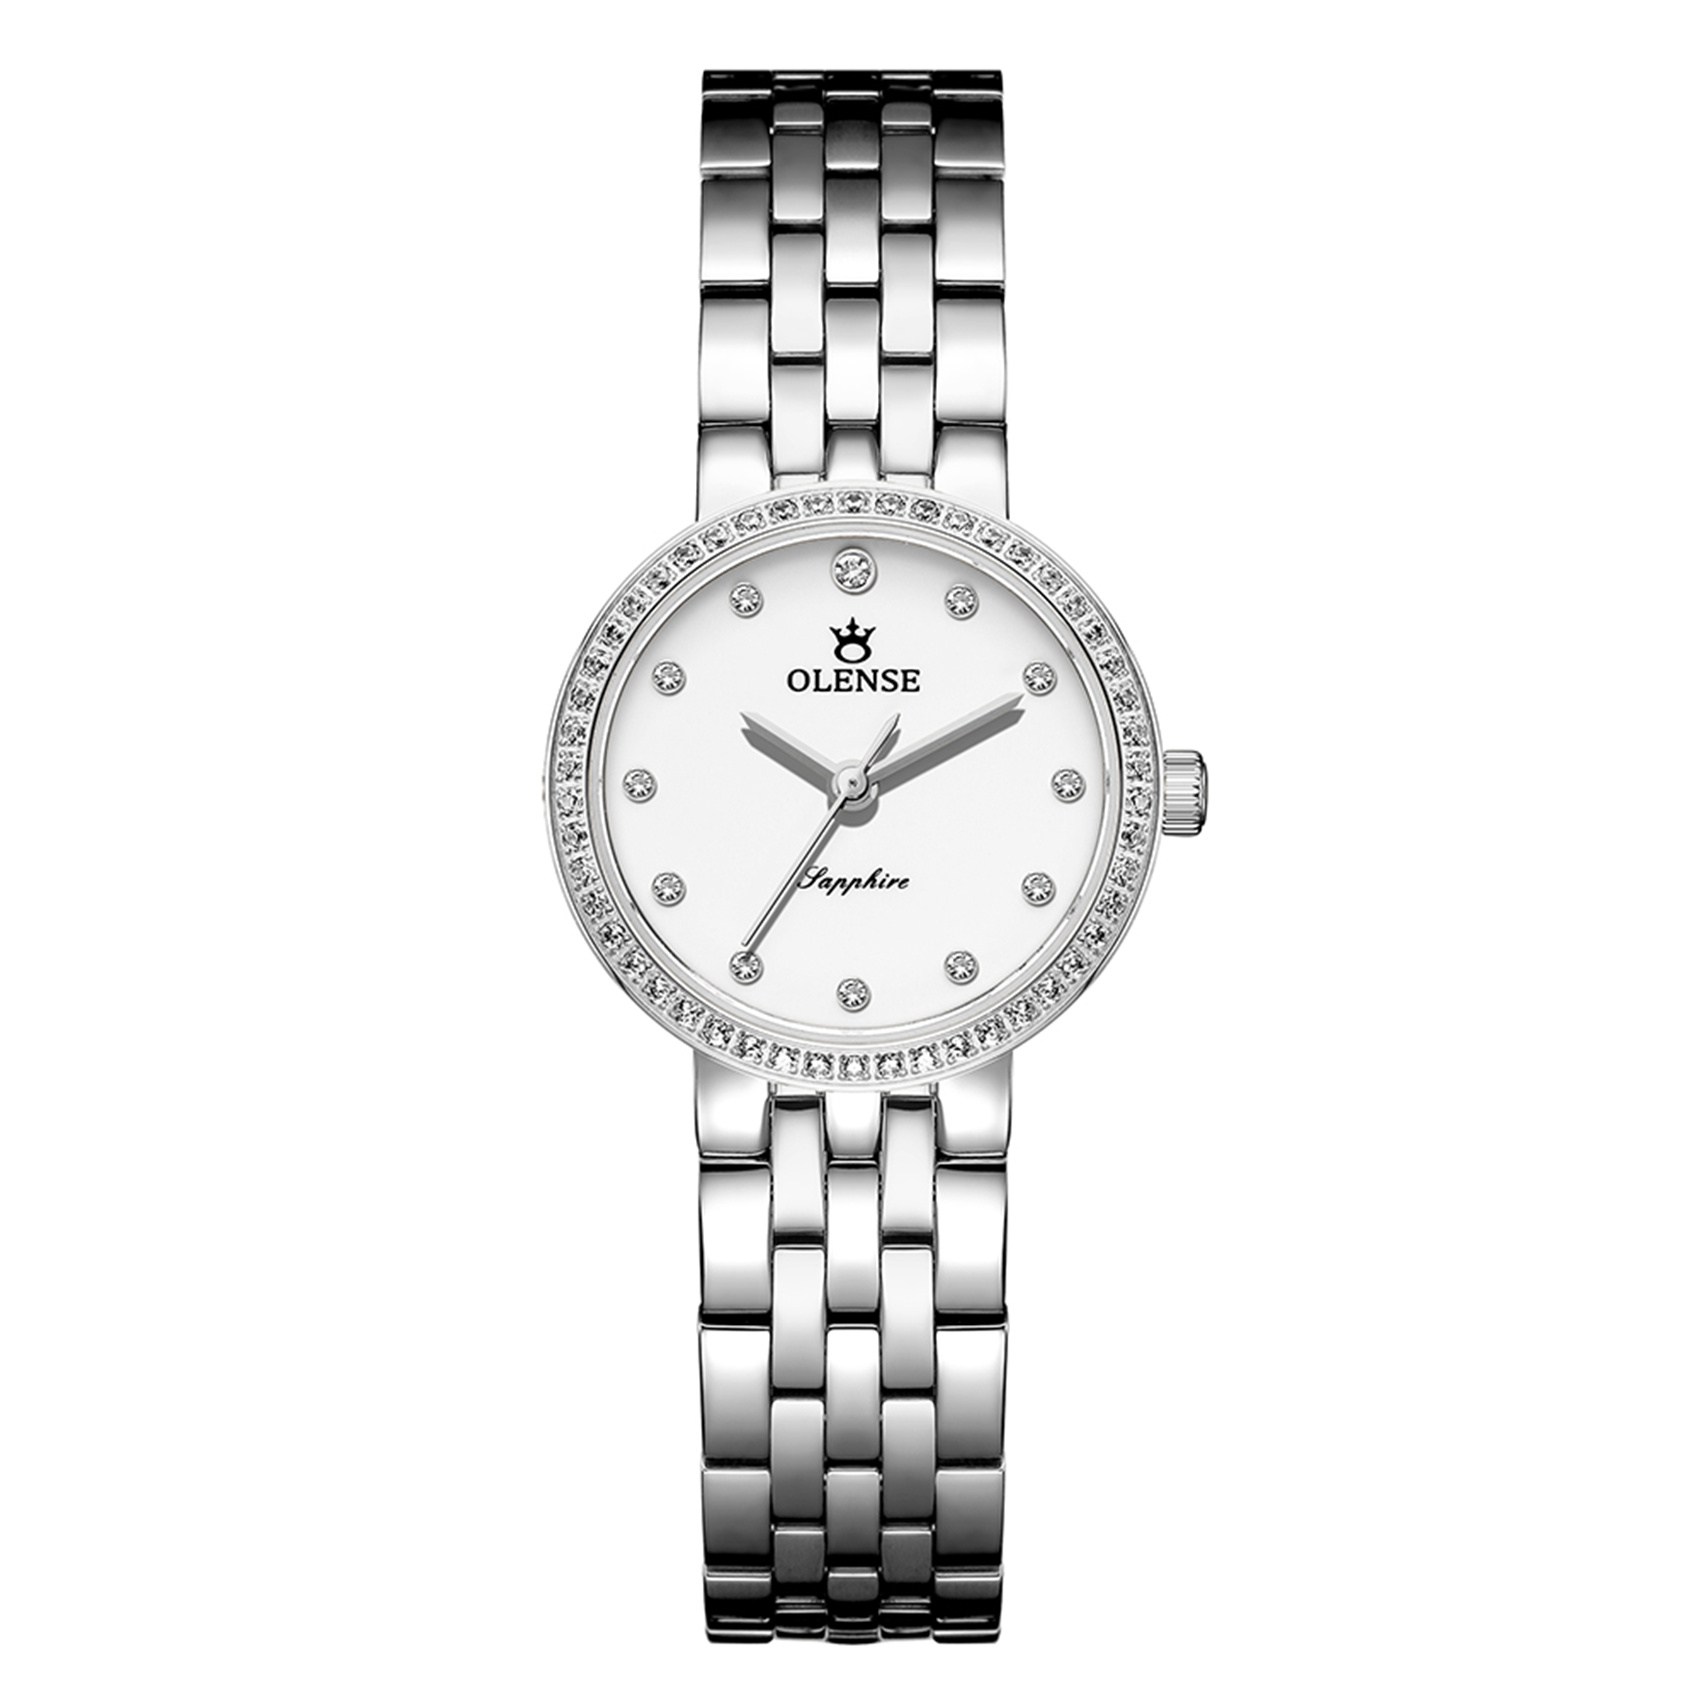 OLENSE - Luxury Watch for Women, Stainless Steel, 25mm, Silver & White